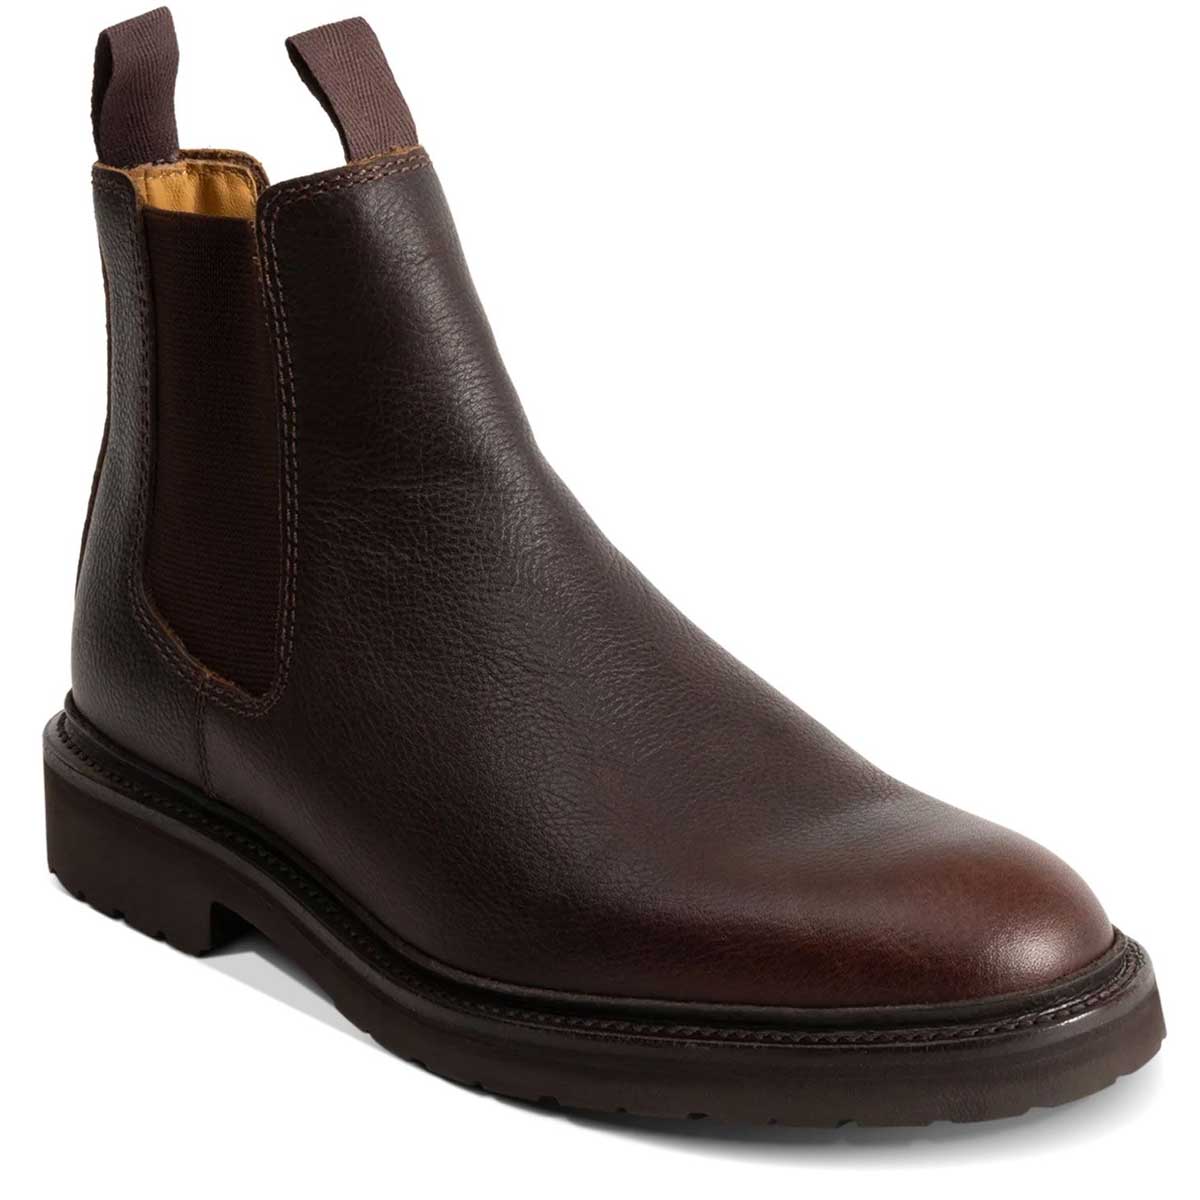 BARKER Camborne Xtra Lite Chelsea Boots - Mens - Brown Grain Pull Up